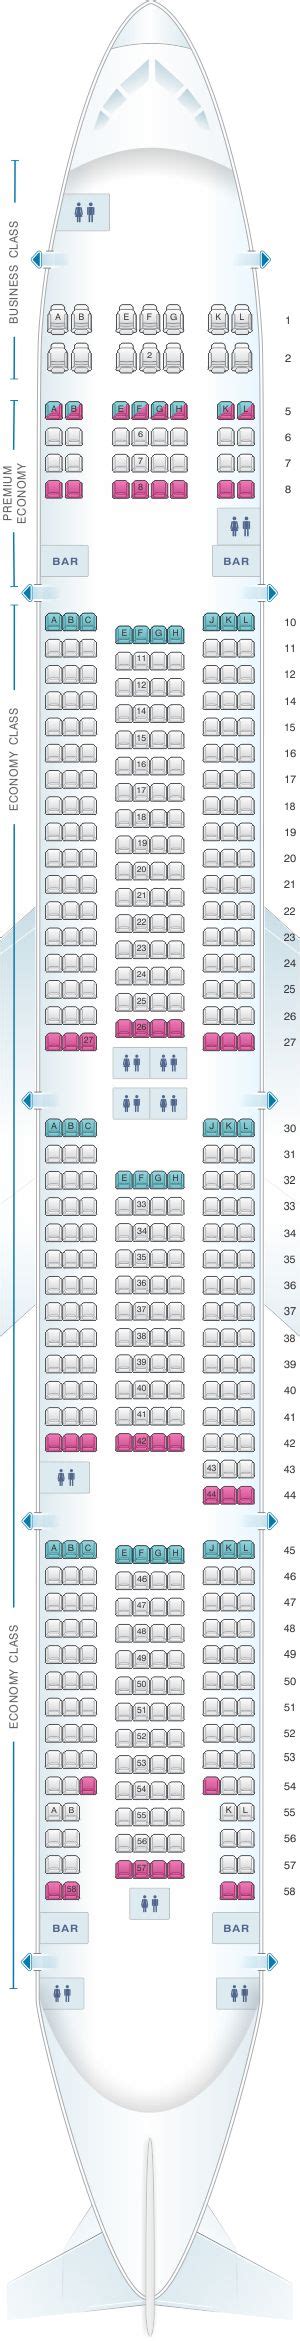 The Seating Plan For An Airliner With Several Seats And Numbers On Each